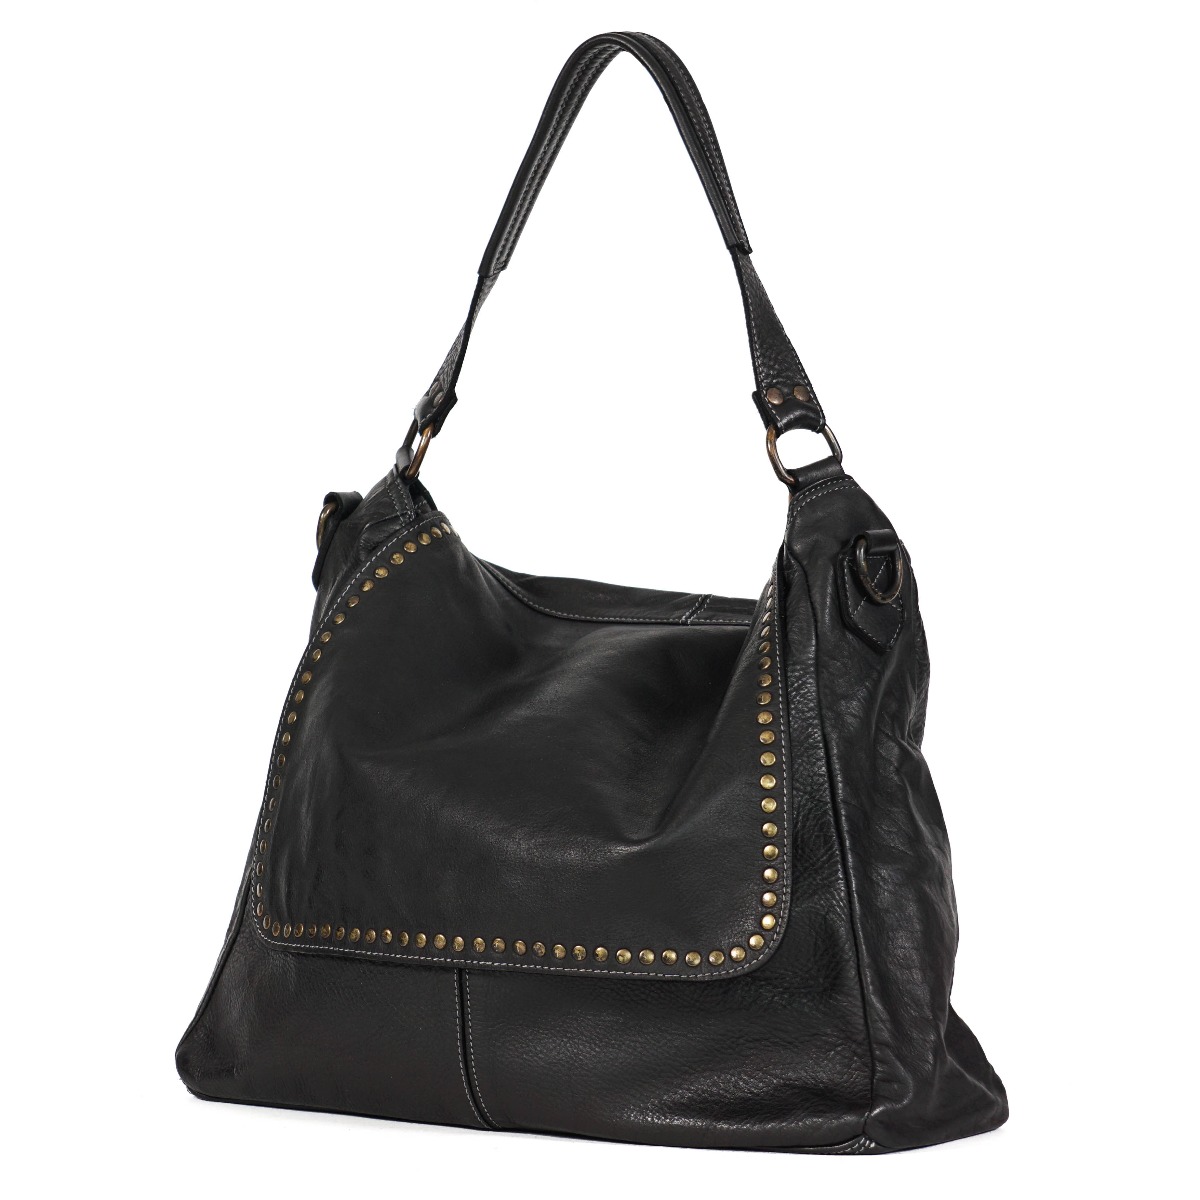 Black washed leather women messenger bag with studs